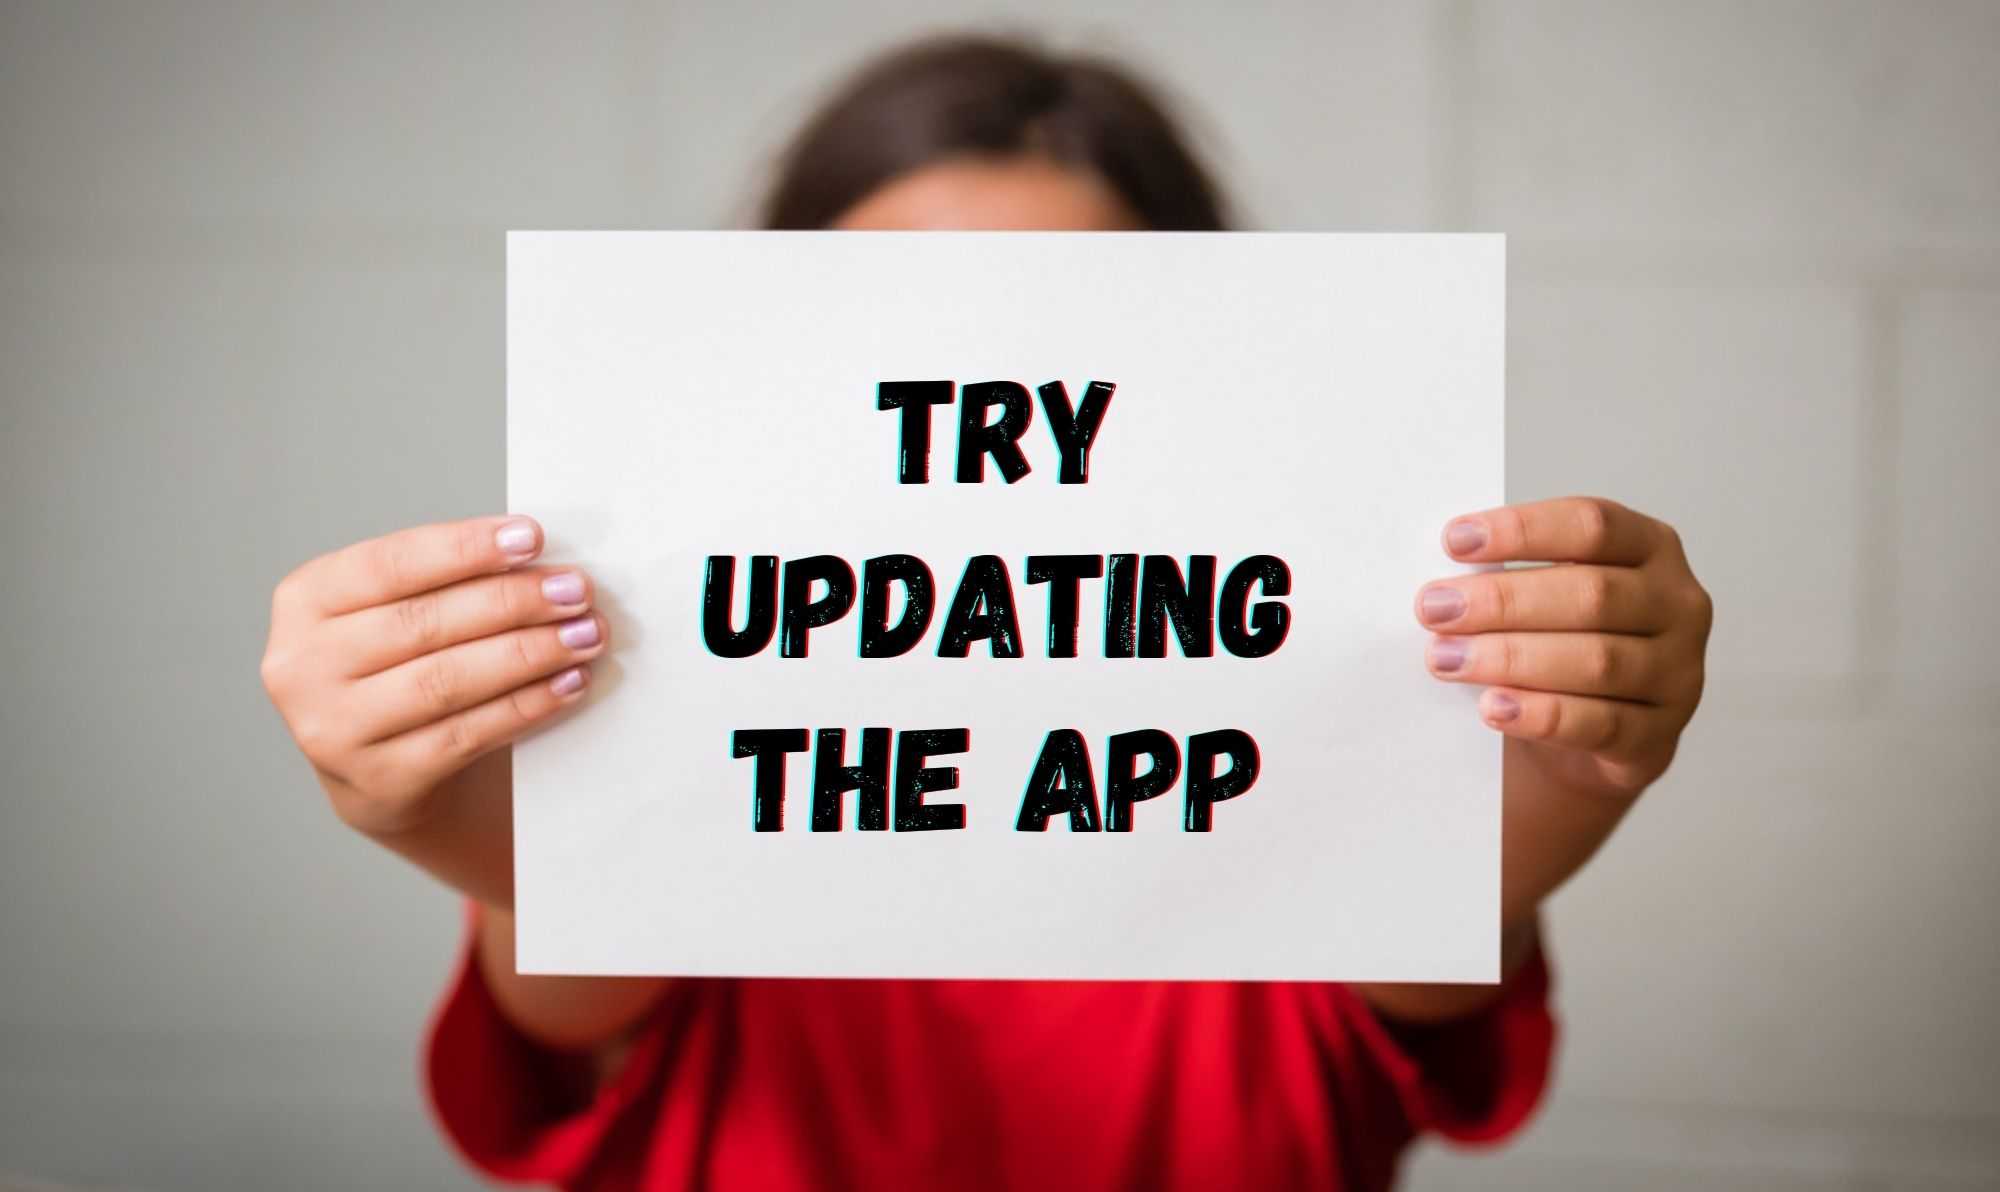 Try updating the app